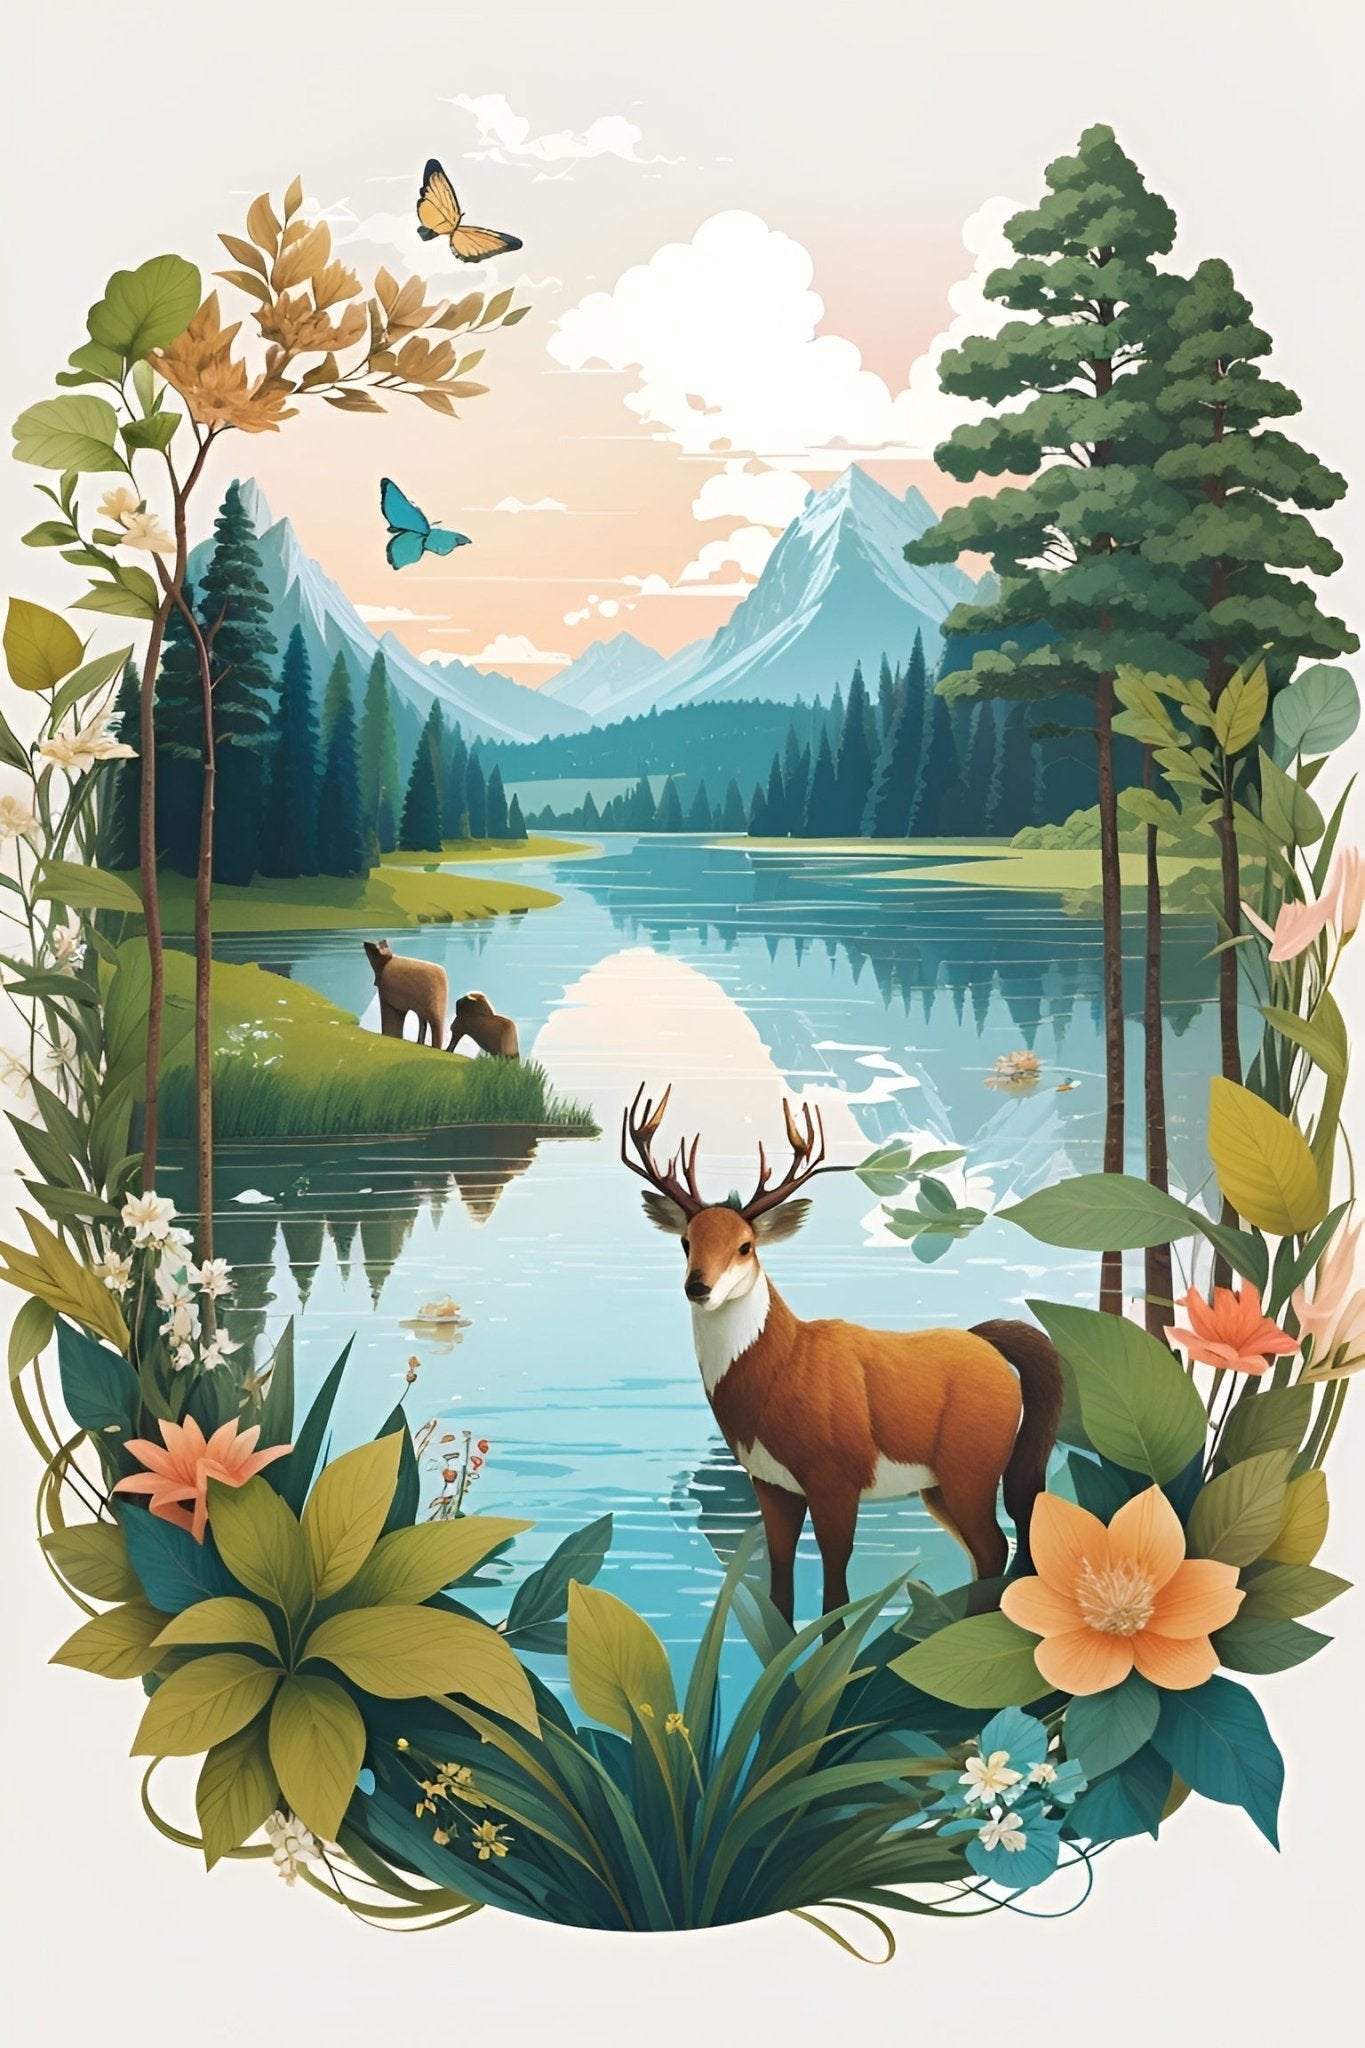 Harmony of Nature - Paint by Numbers - Artslo.com